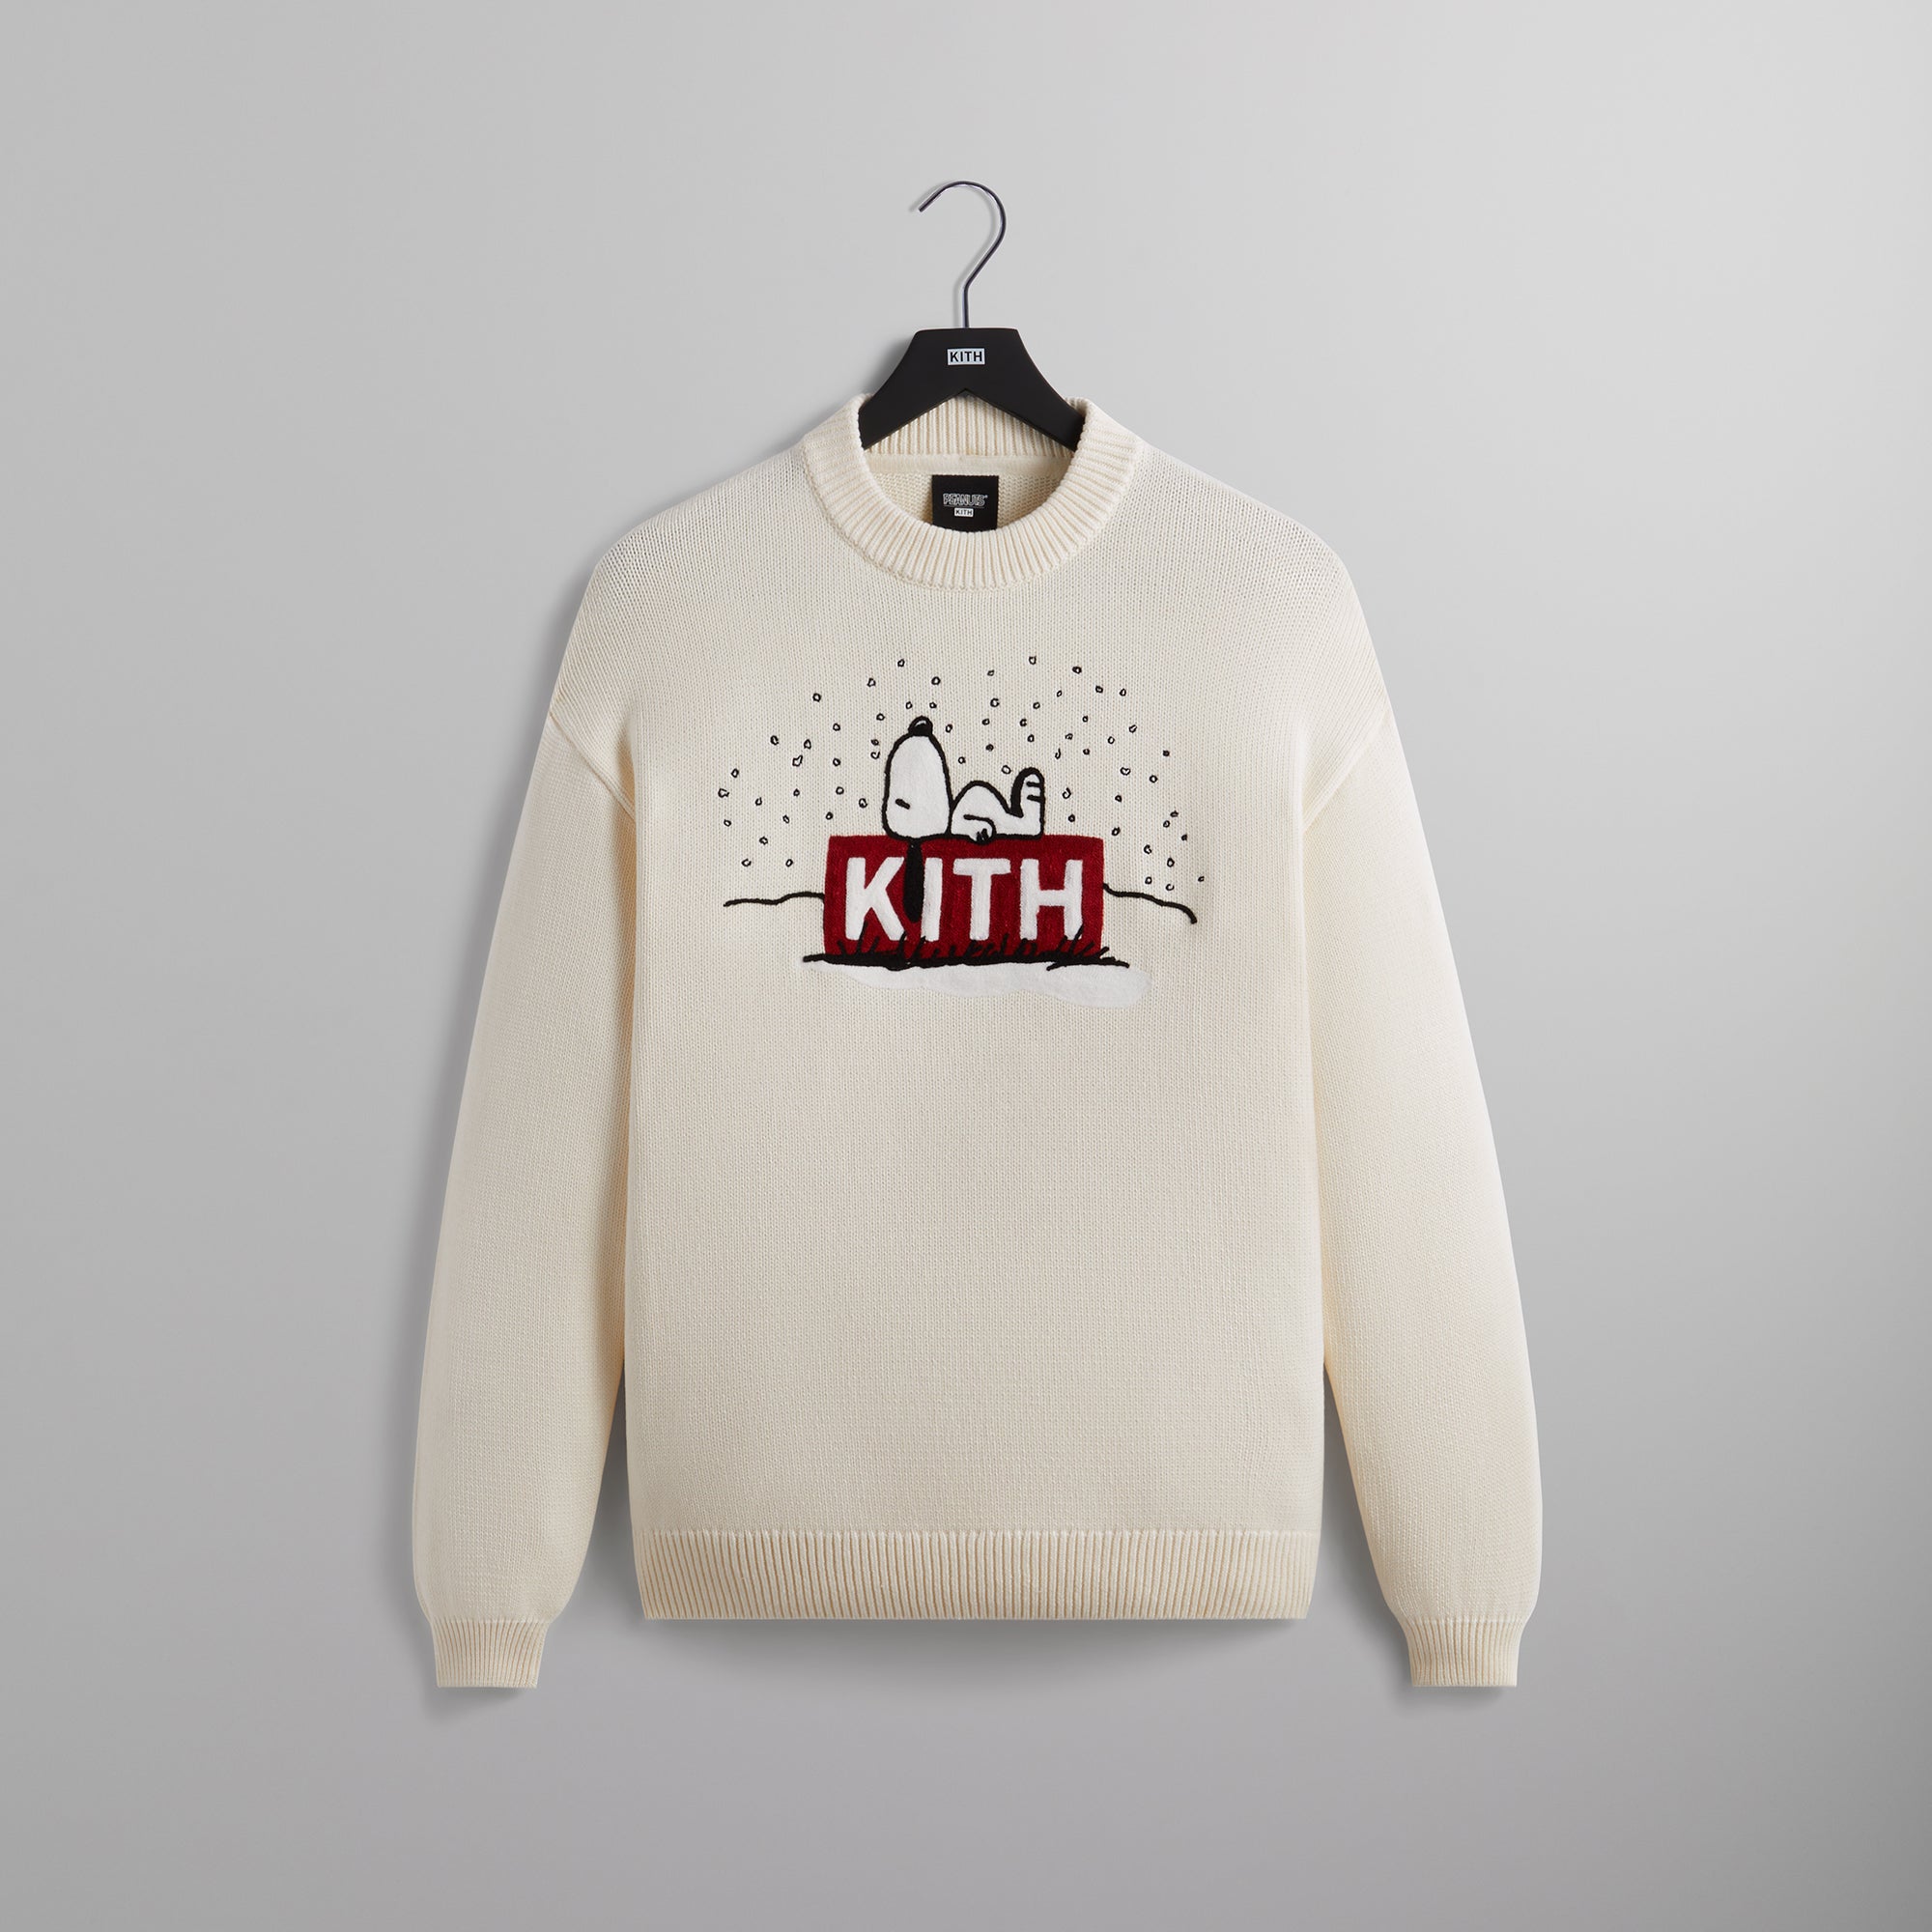 Tシャツ/カットソー(半袖/袖なし)KITH Kith for Peanuts Doghouse Tee【即完売品】